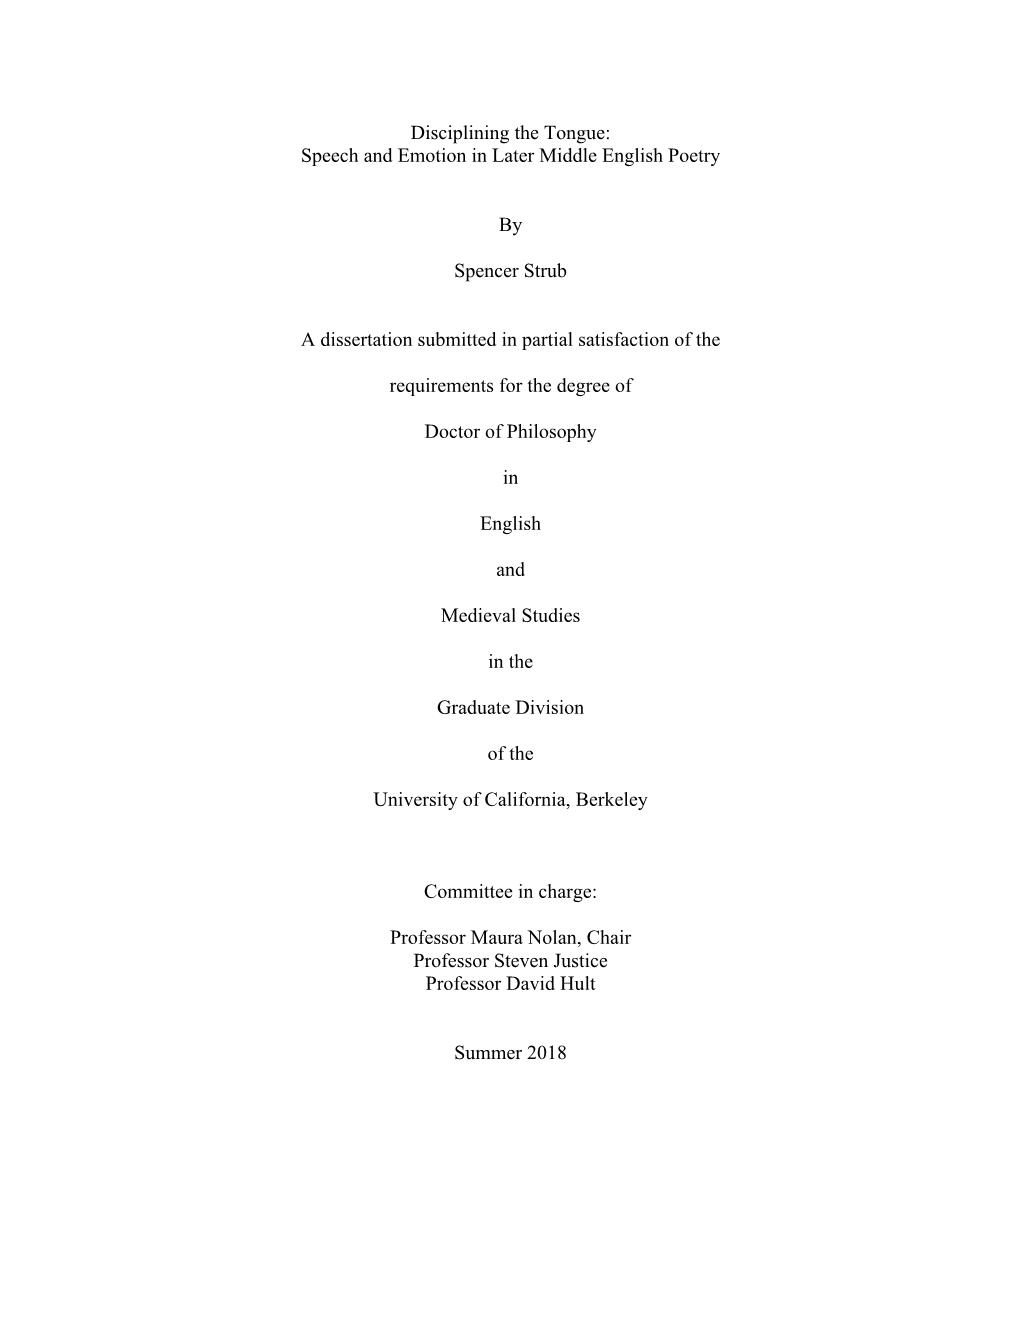 Disciplining the Tongue: Speech and Emotion in Later Middle English Poetry by Spencer Strub a Dissertation Submitted in Partial